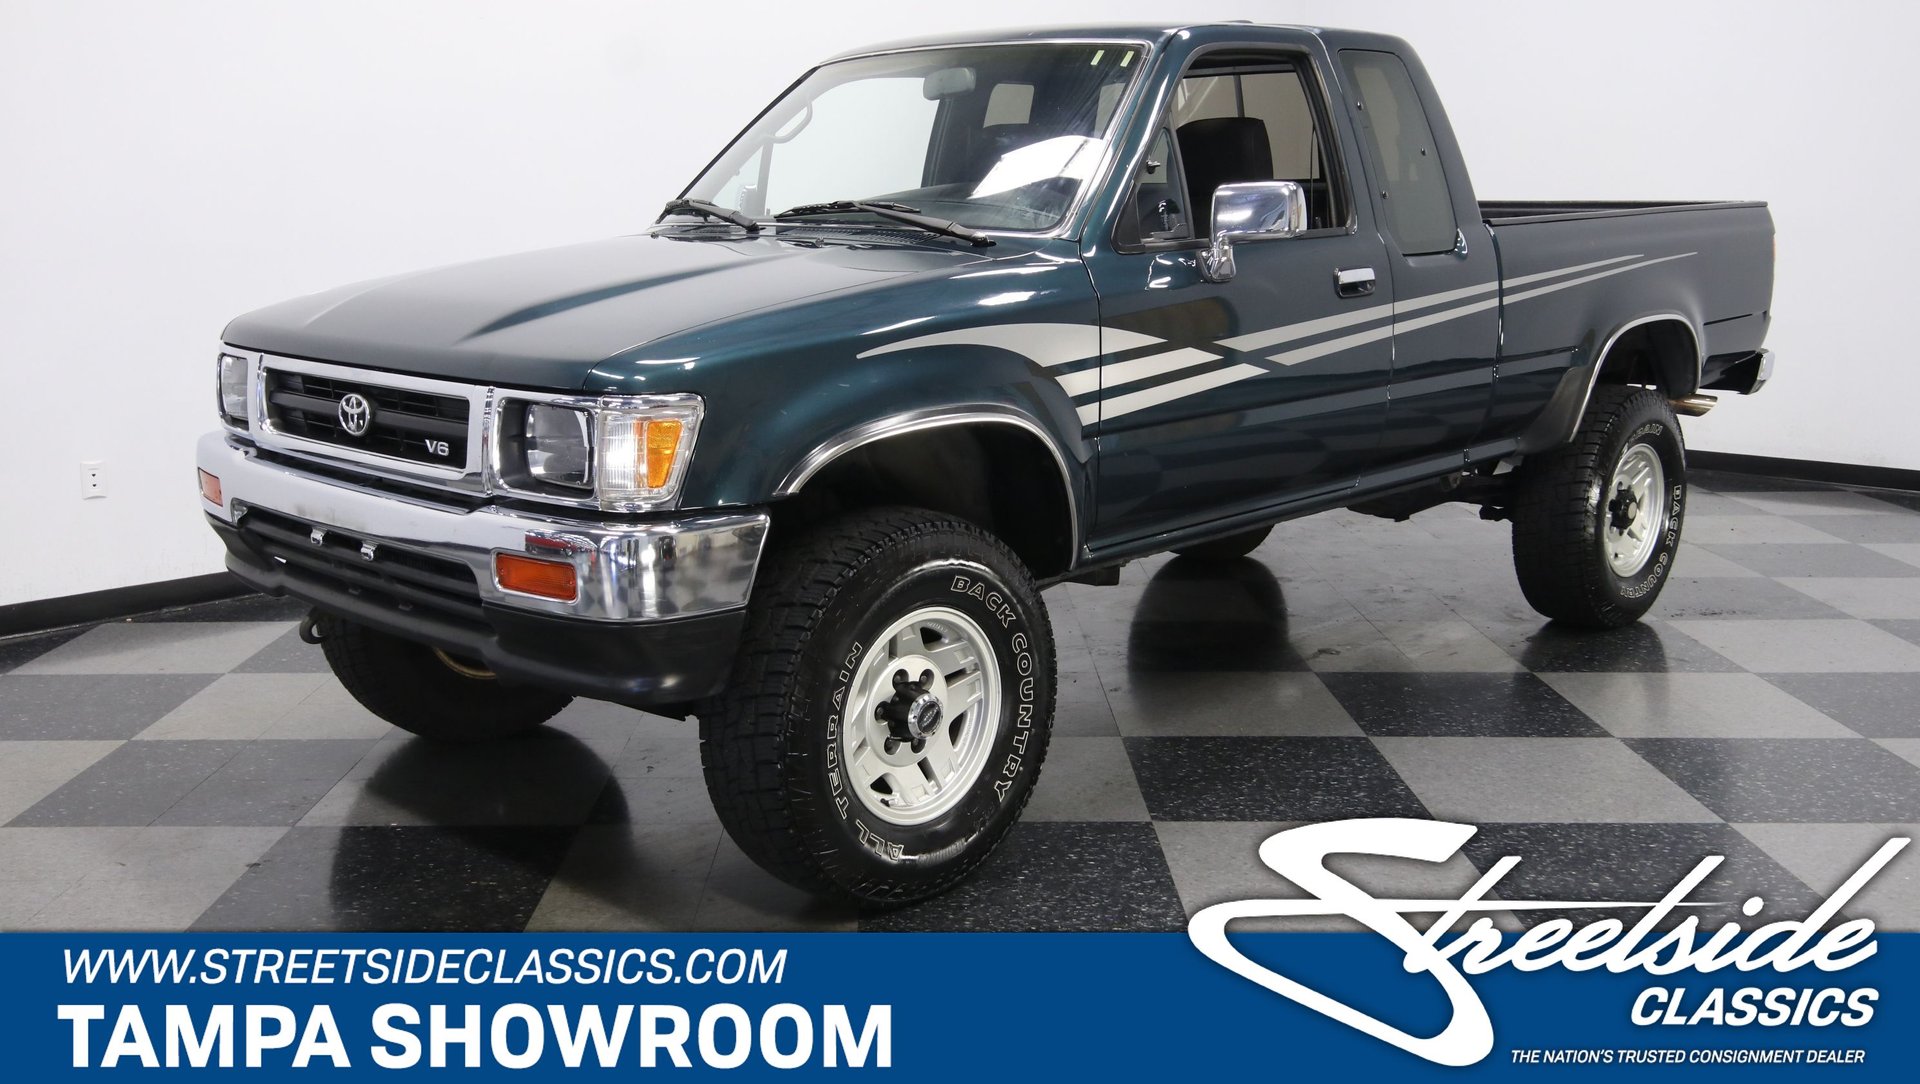 1994 Toyota Pickup | Streetside Classics - The Nation's Trusted Classic Car Consignment Dealer 1994 Toyota Pickup 4x4 Stock Tire Size